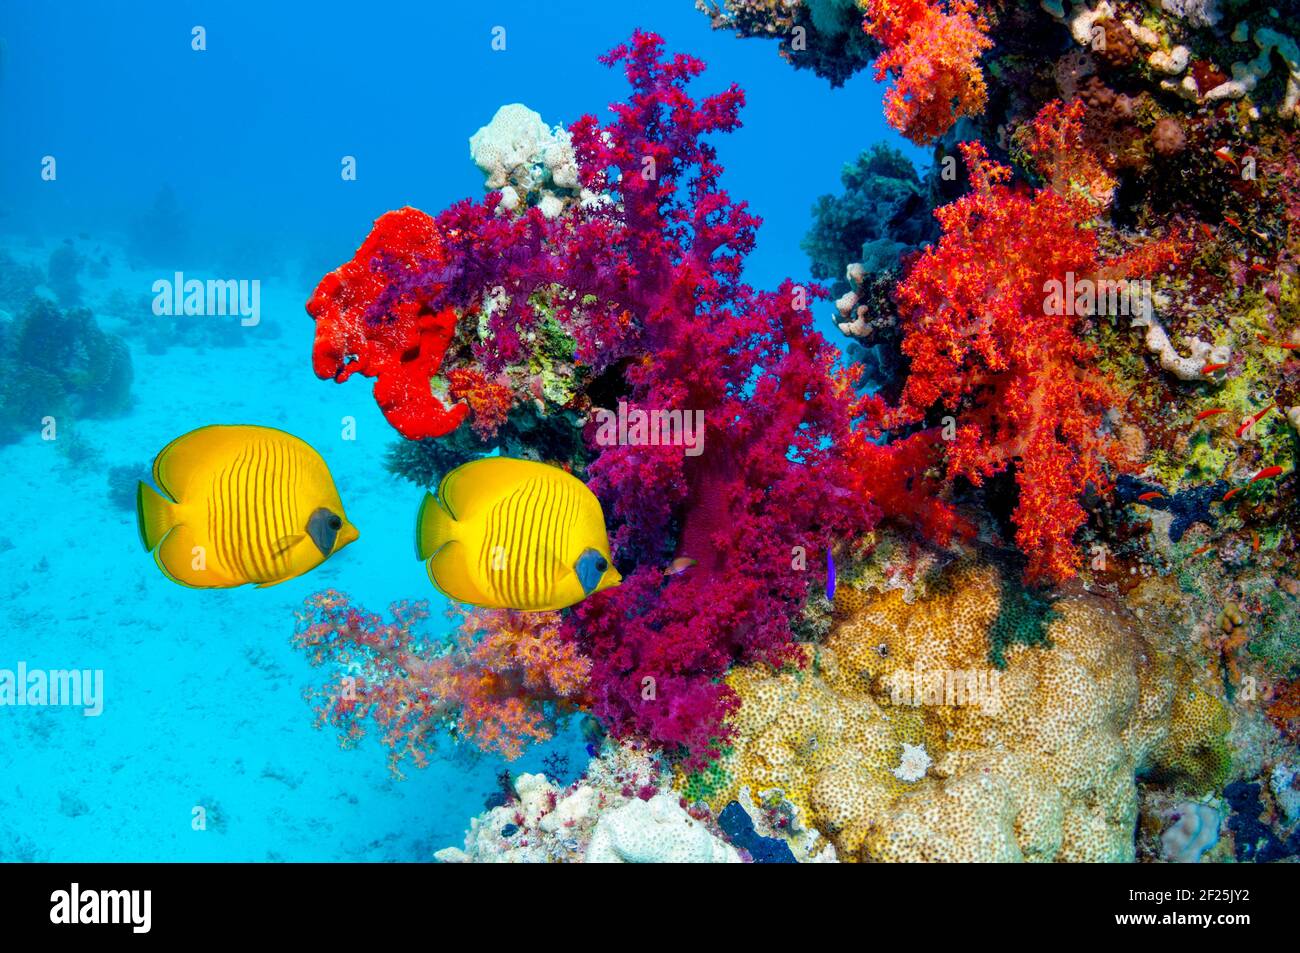 Coral reef scenery with Golden butterflyfish [Chaetodon semilarvatus] swimming past soft corals [Dendronephthya sp.].  Egypt, Red Sea. Stock Photo